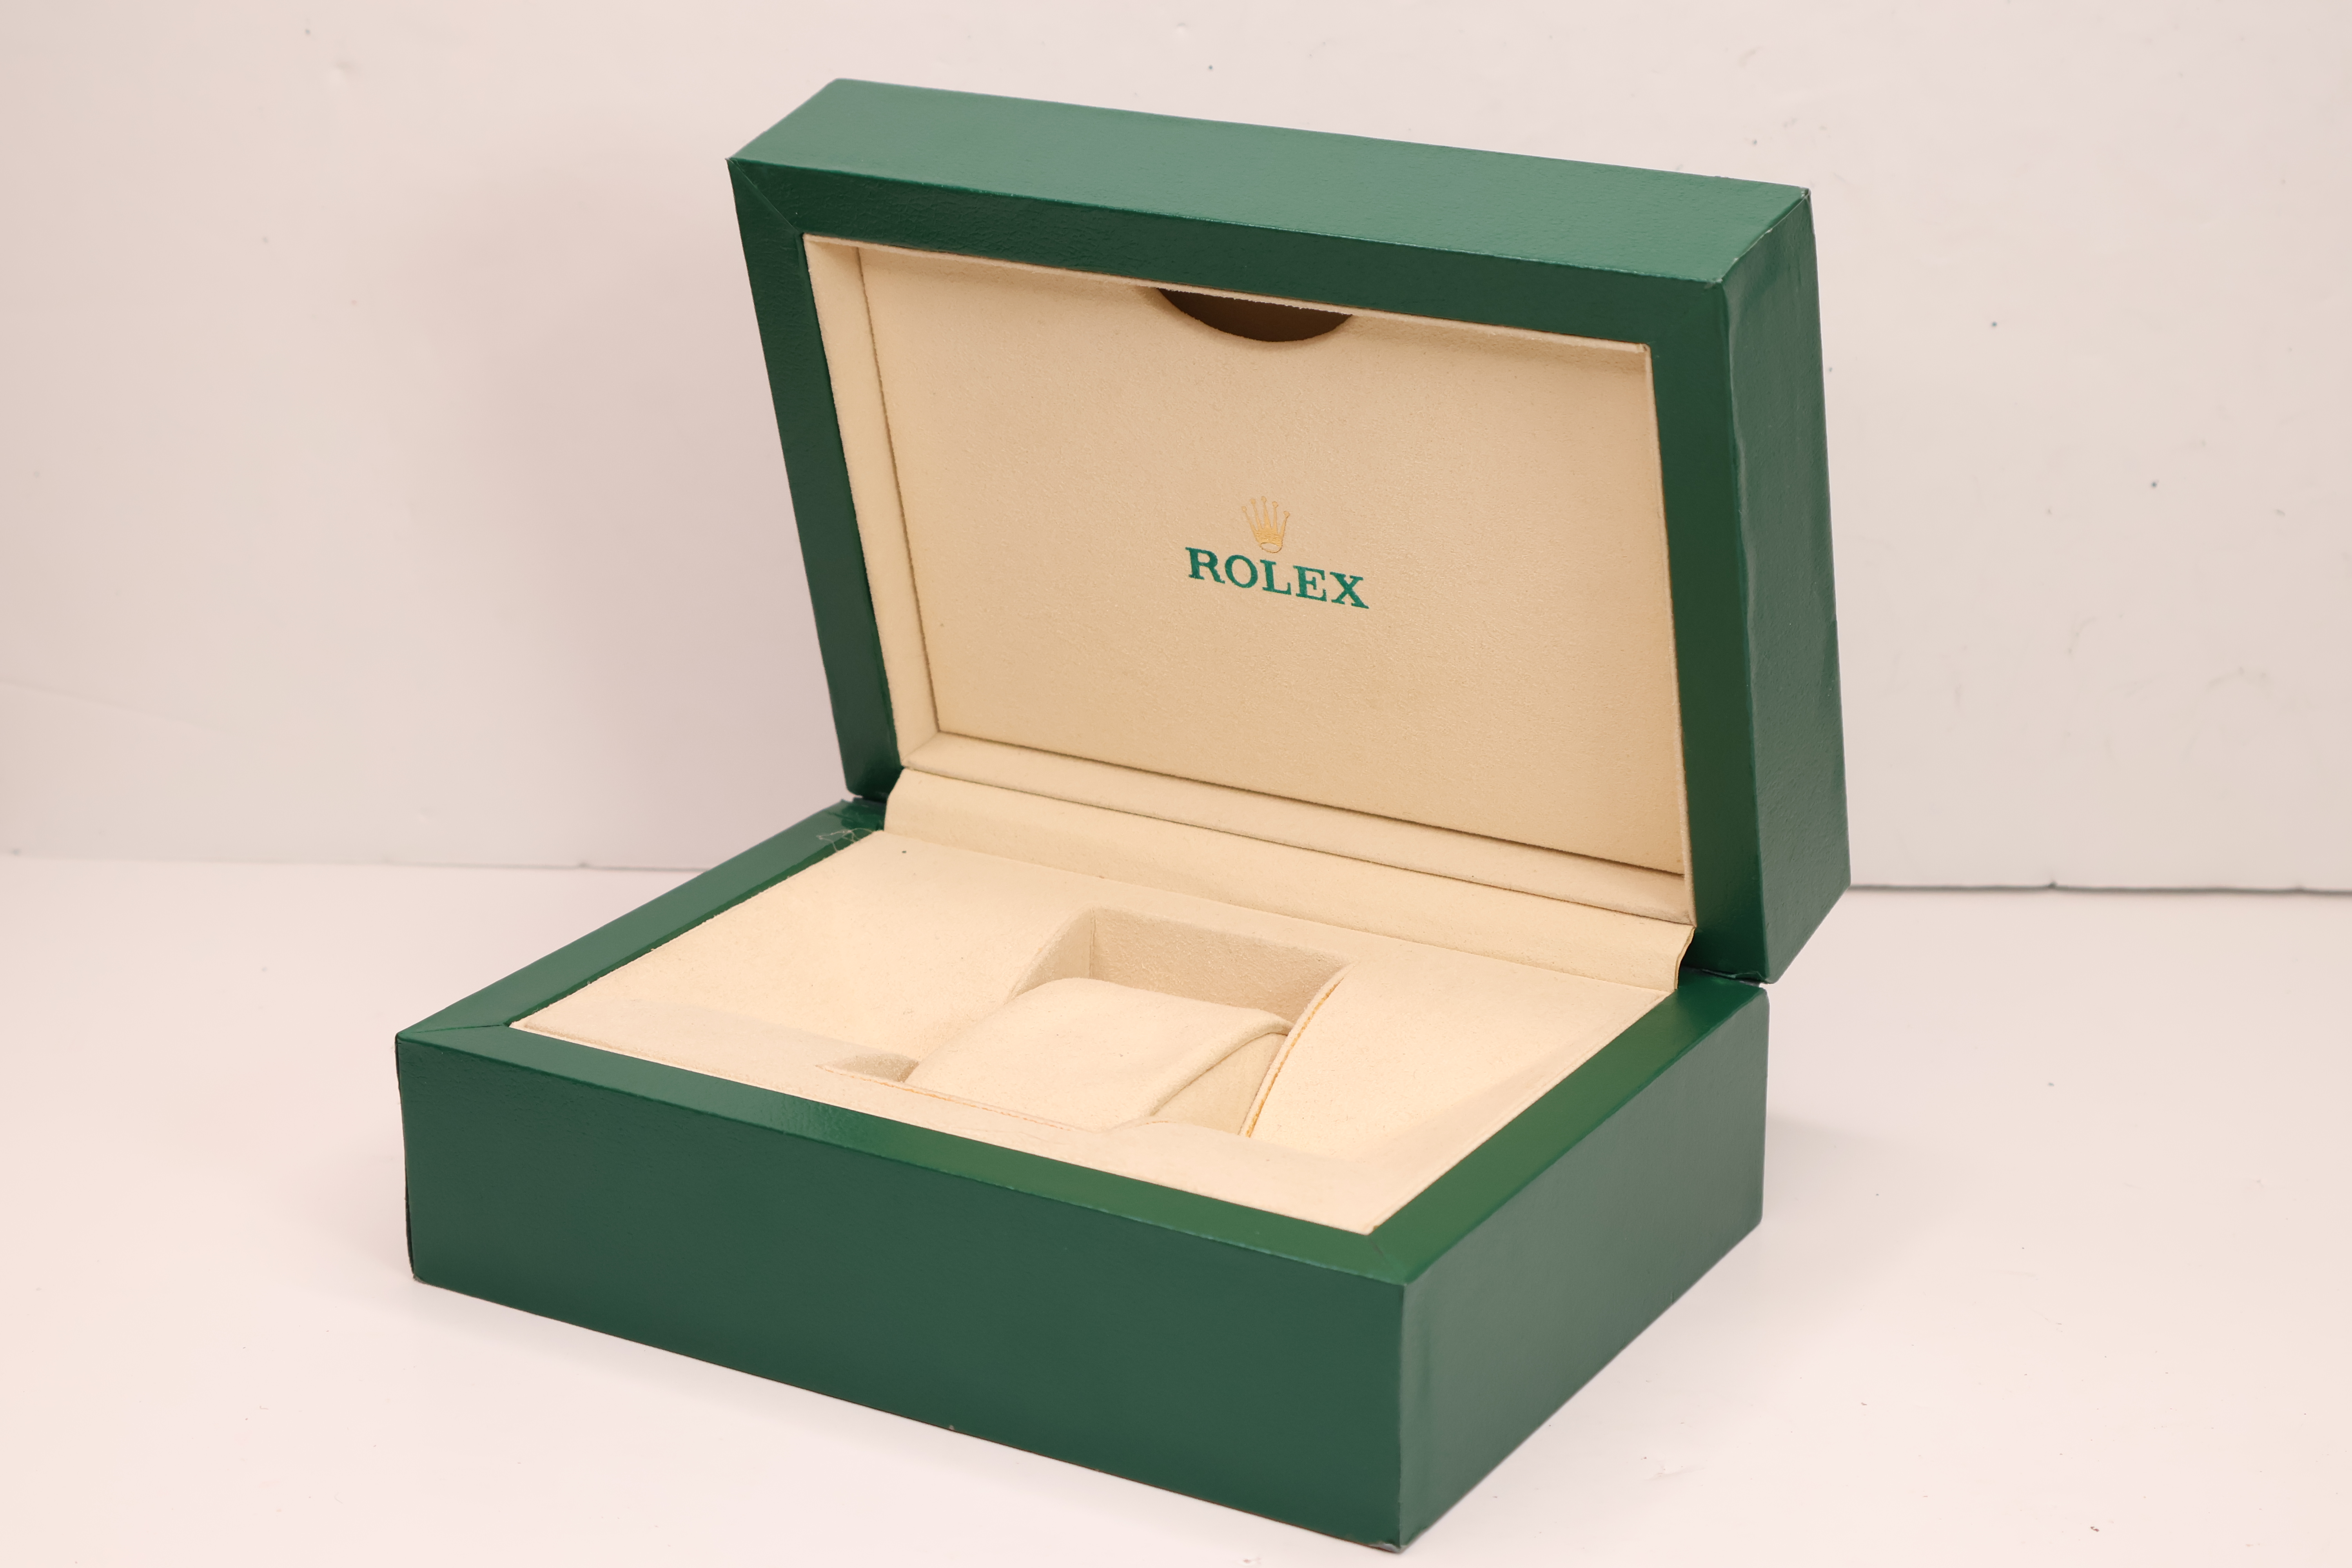 *To Be Sold Without Reserve* Rolex modern box with cushion